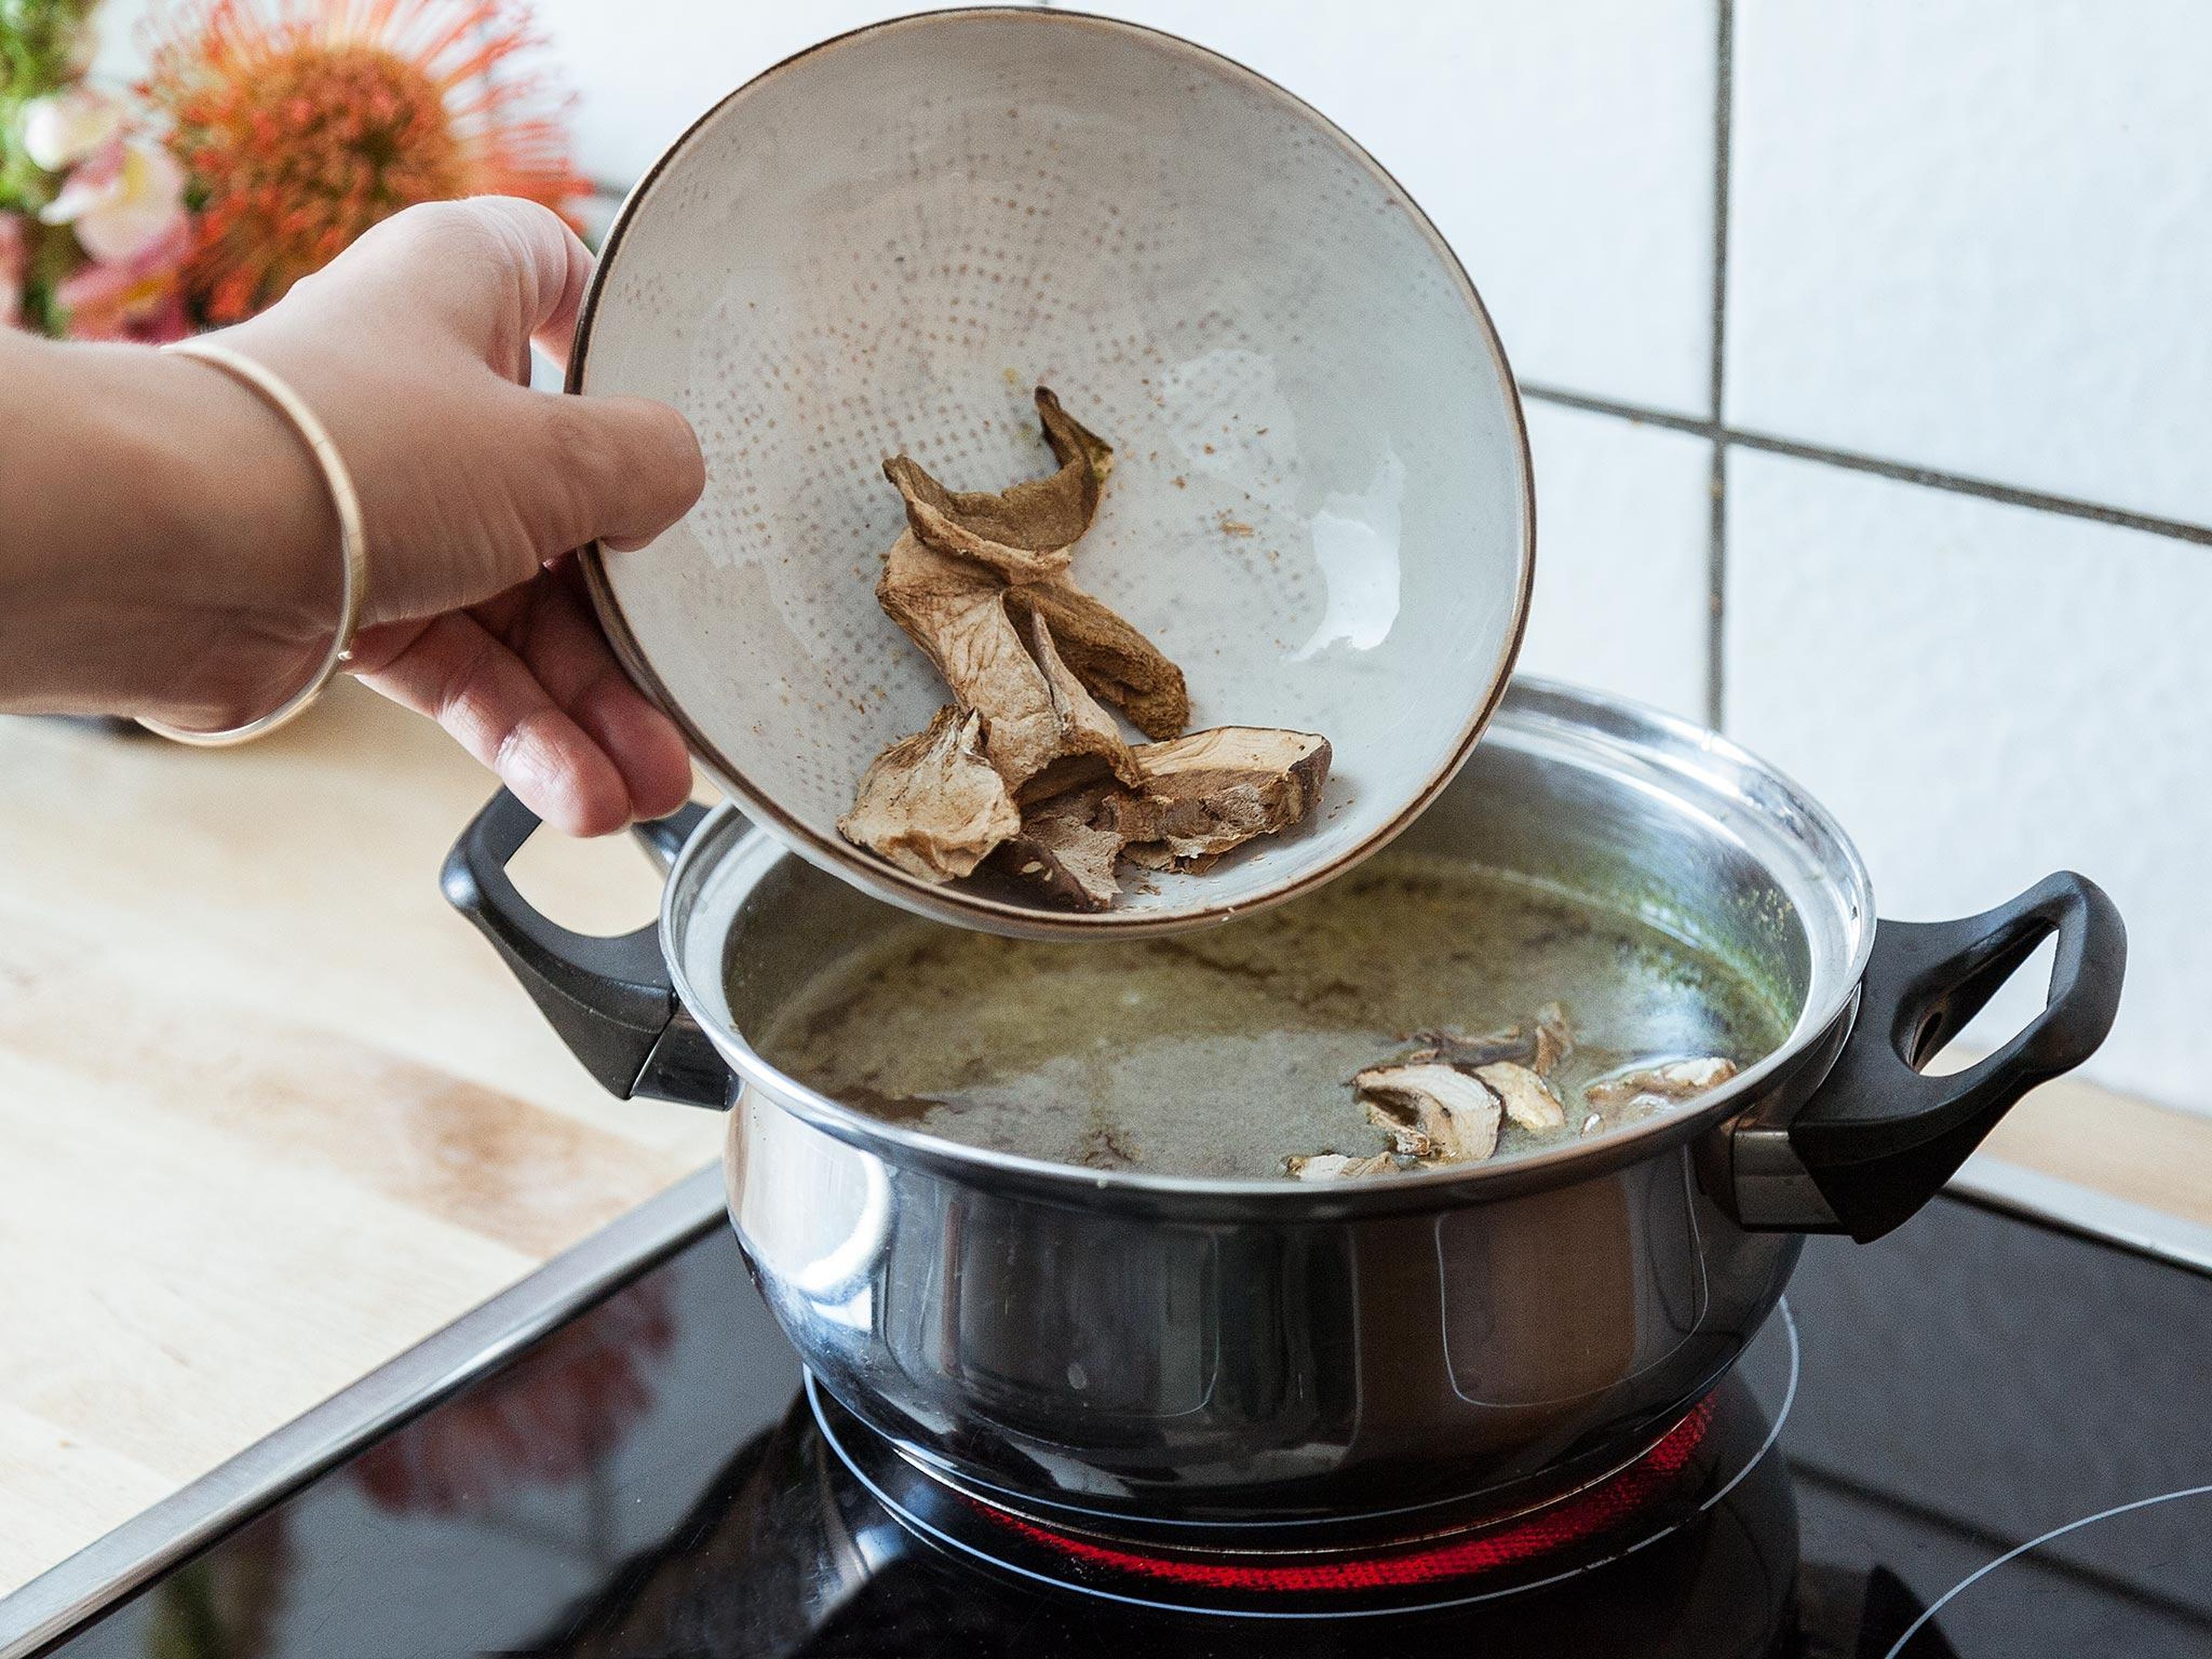 In a small saucepan, bring vegetable stock to a simmer and add dried mushrooms. Remove from heat and let steep for approx. 30 min.